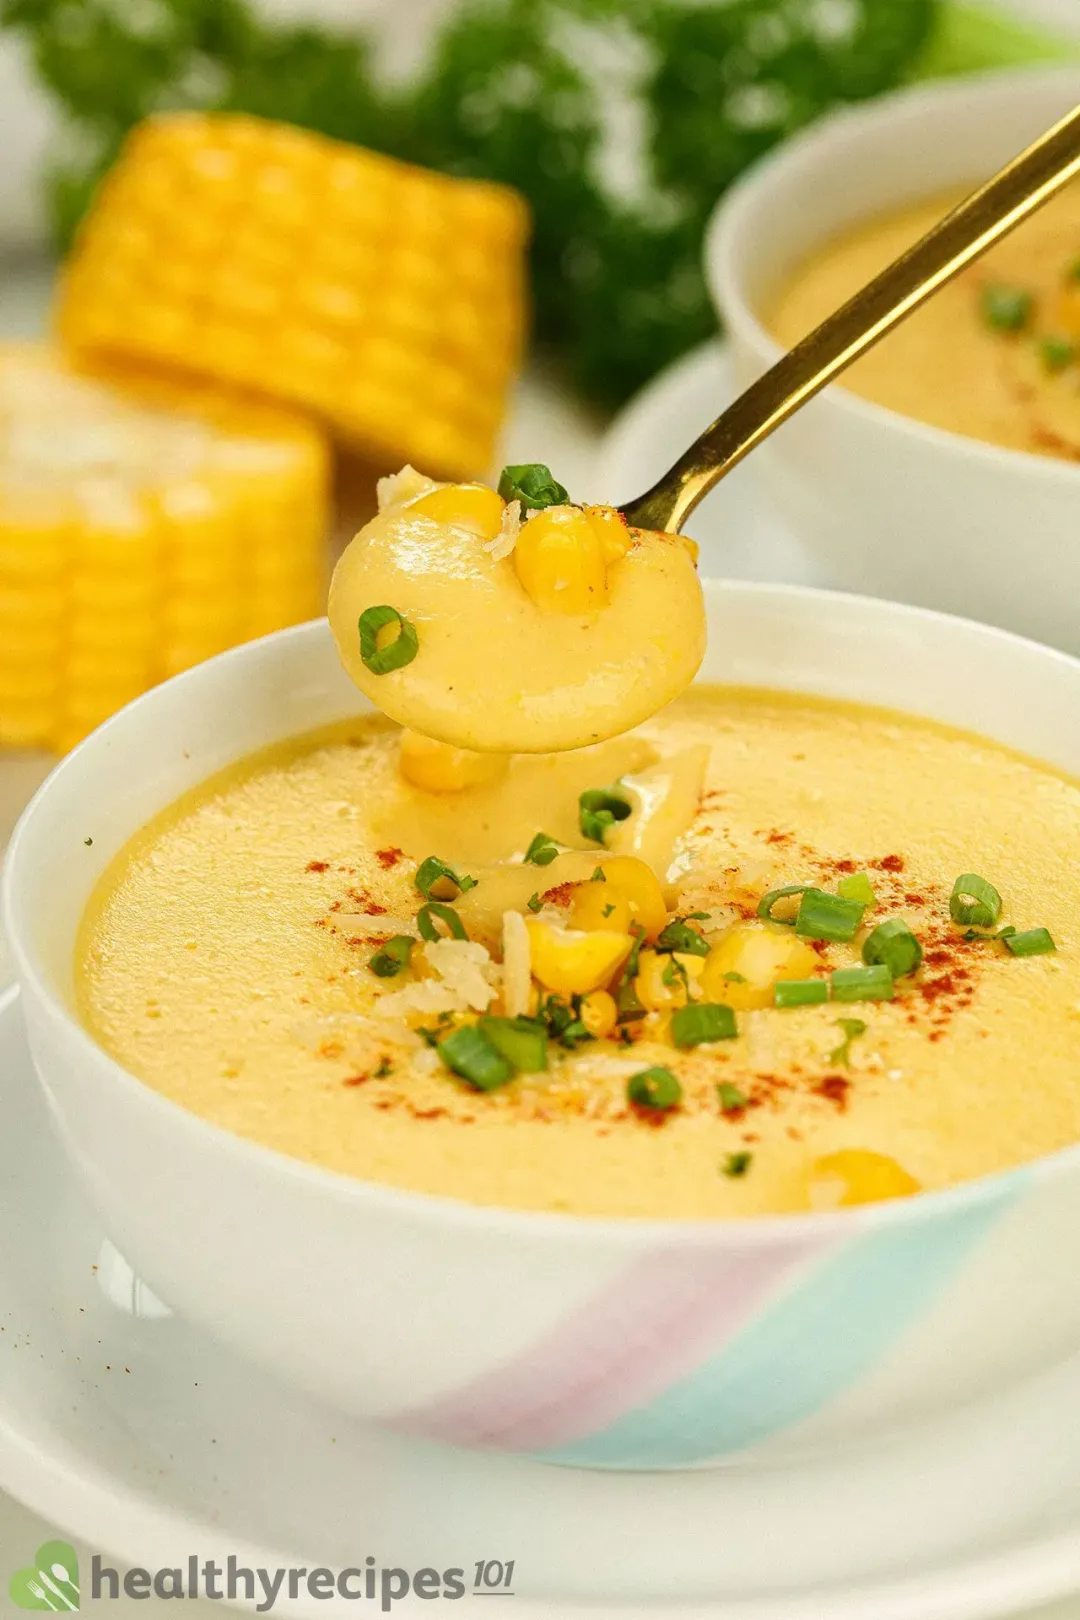 Is This Corn Soup Recipe Healthy